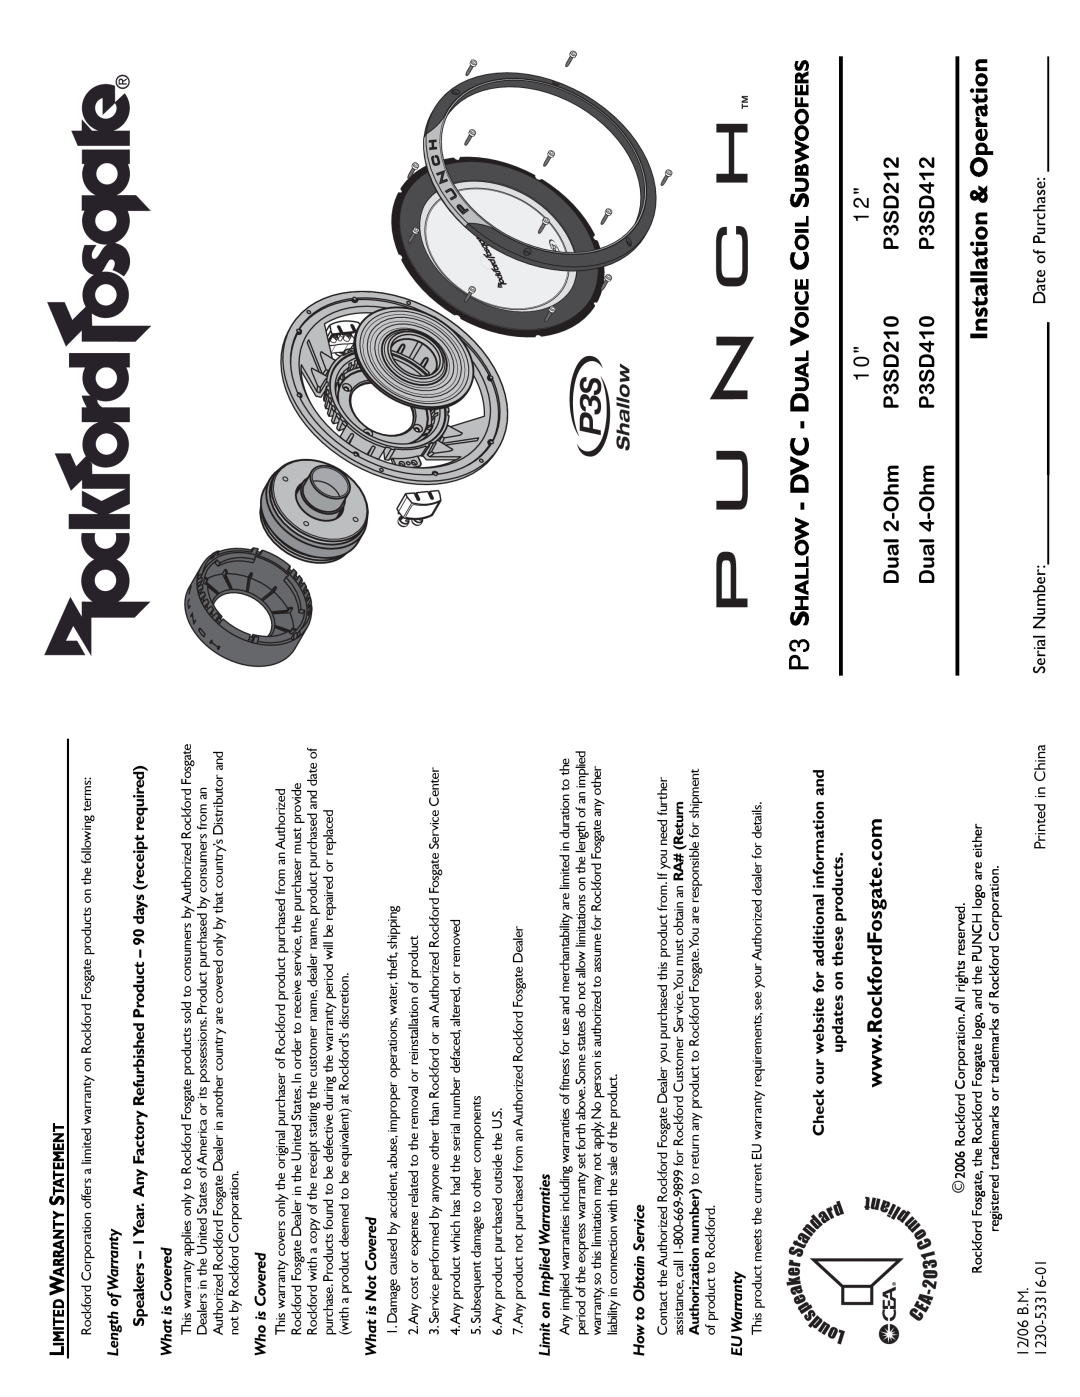 Rockford Fosgate warranty Installation & Operation, P3 SHALLOW - DVC - DUAL VOICE COIL SUBWOOFERS, P3SD210, P3SD212 